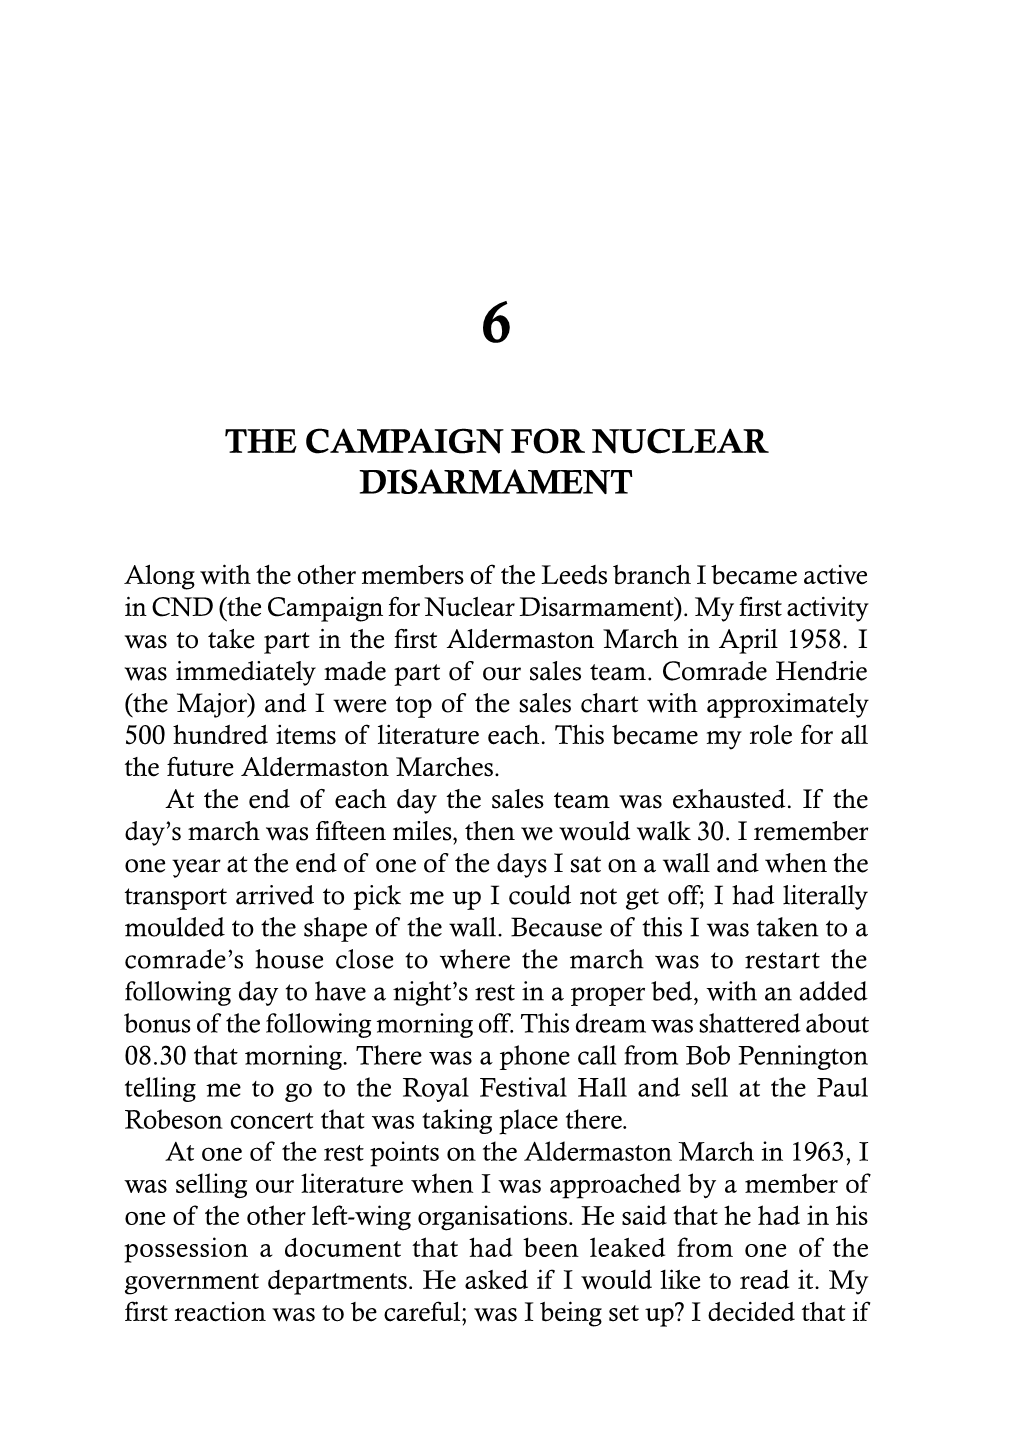 The Campaign for Nuclear Disarmament